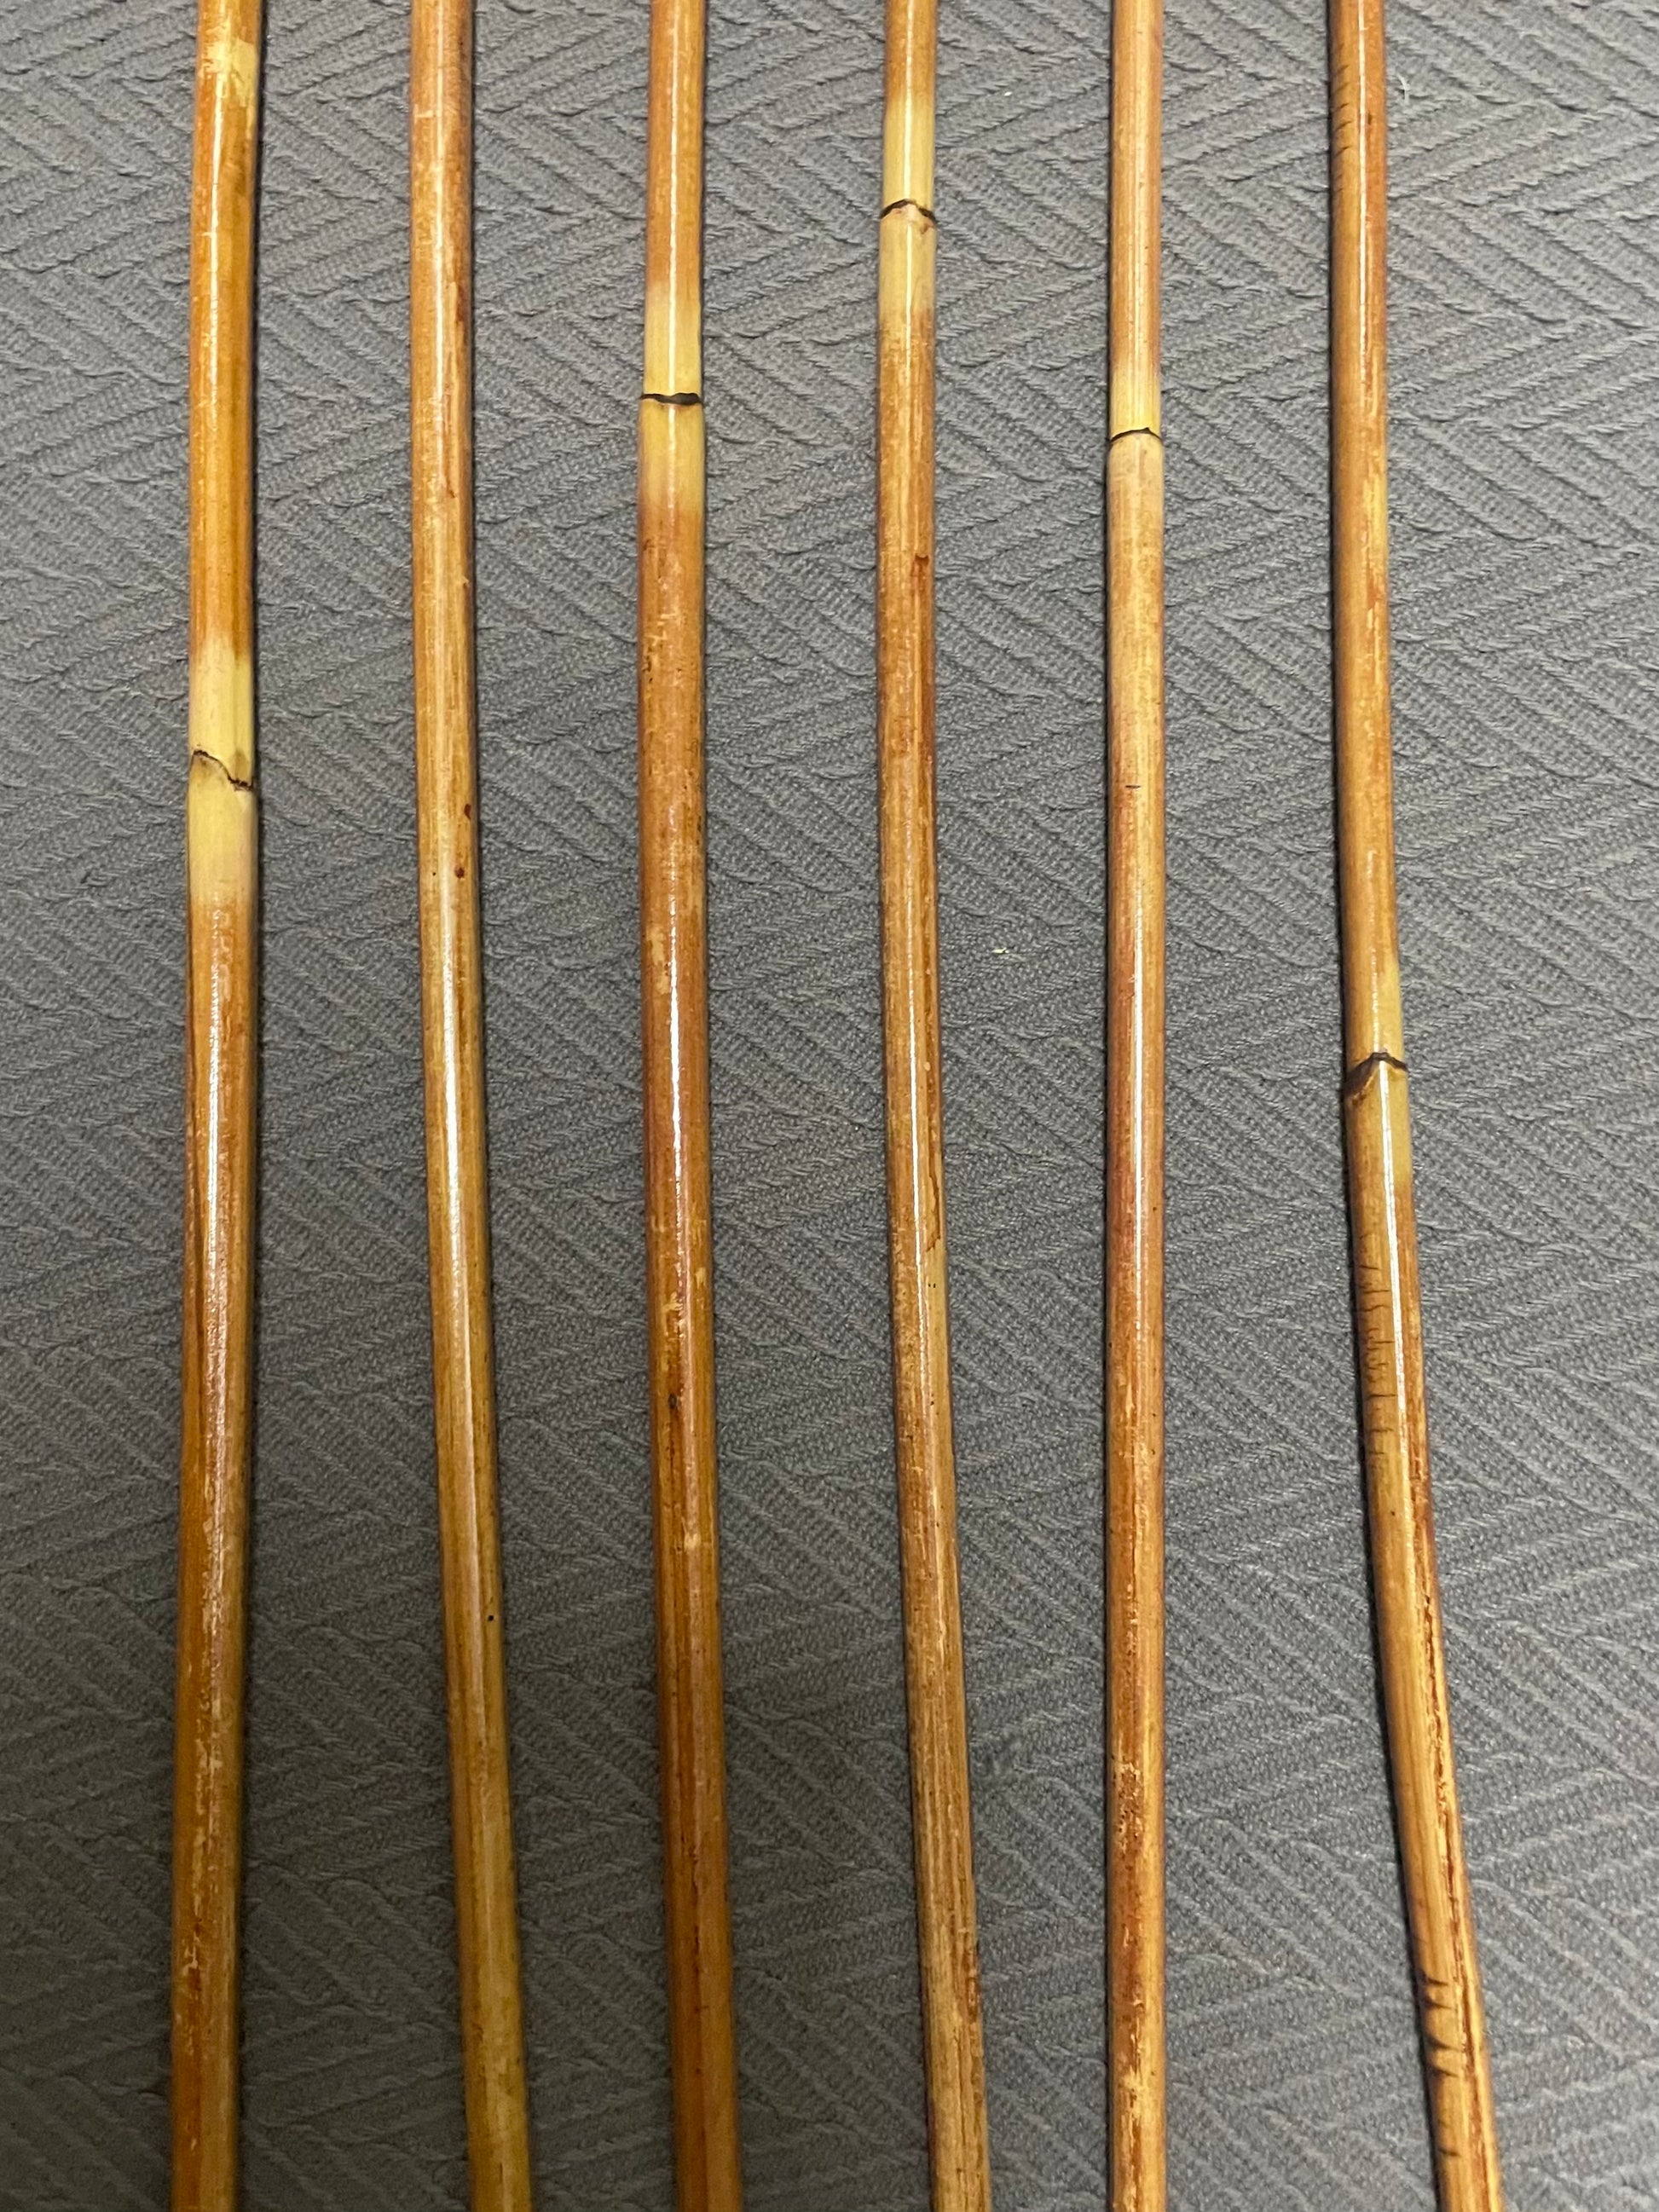 Golden / Honey Smoked Dragon Rattan Canes Set of 6 with Brick Red Paracord Handles - 95 to 98 cms Length - Englishvice Canes